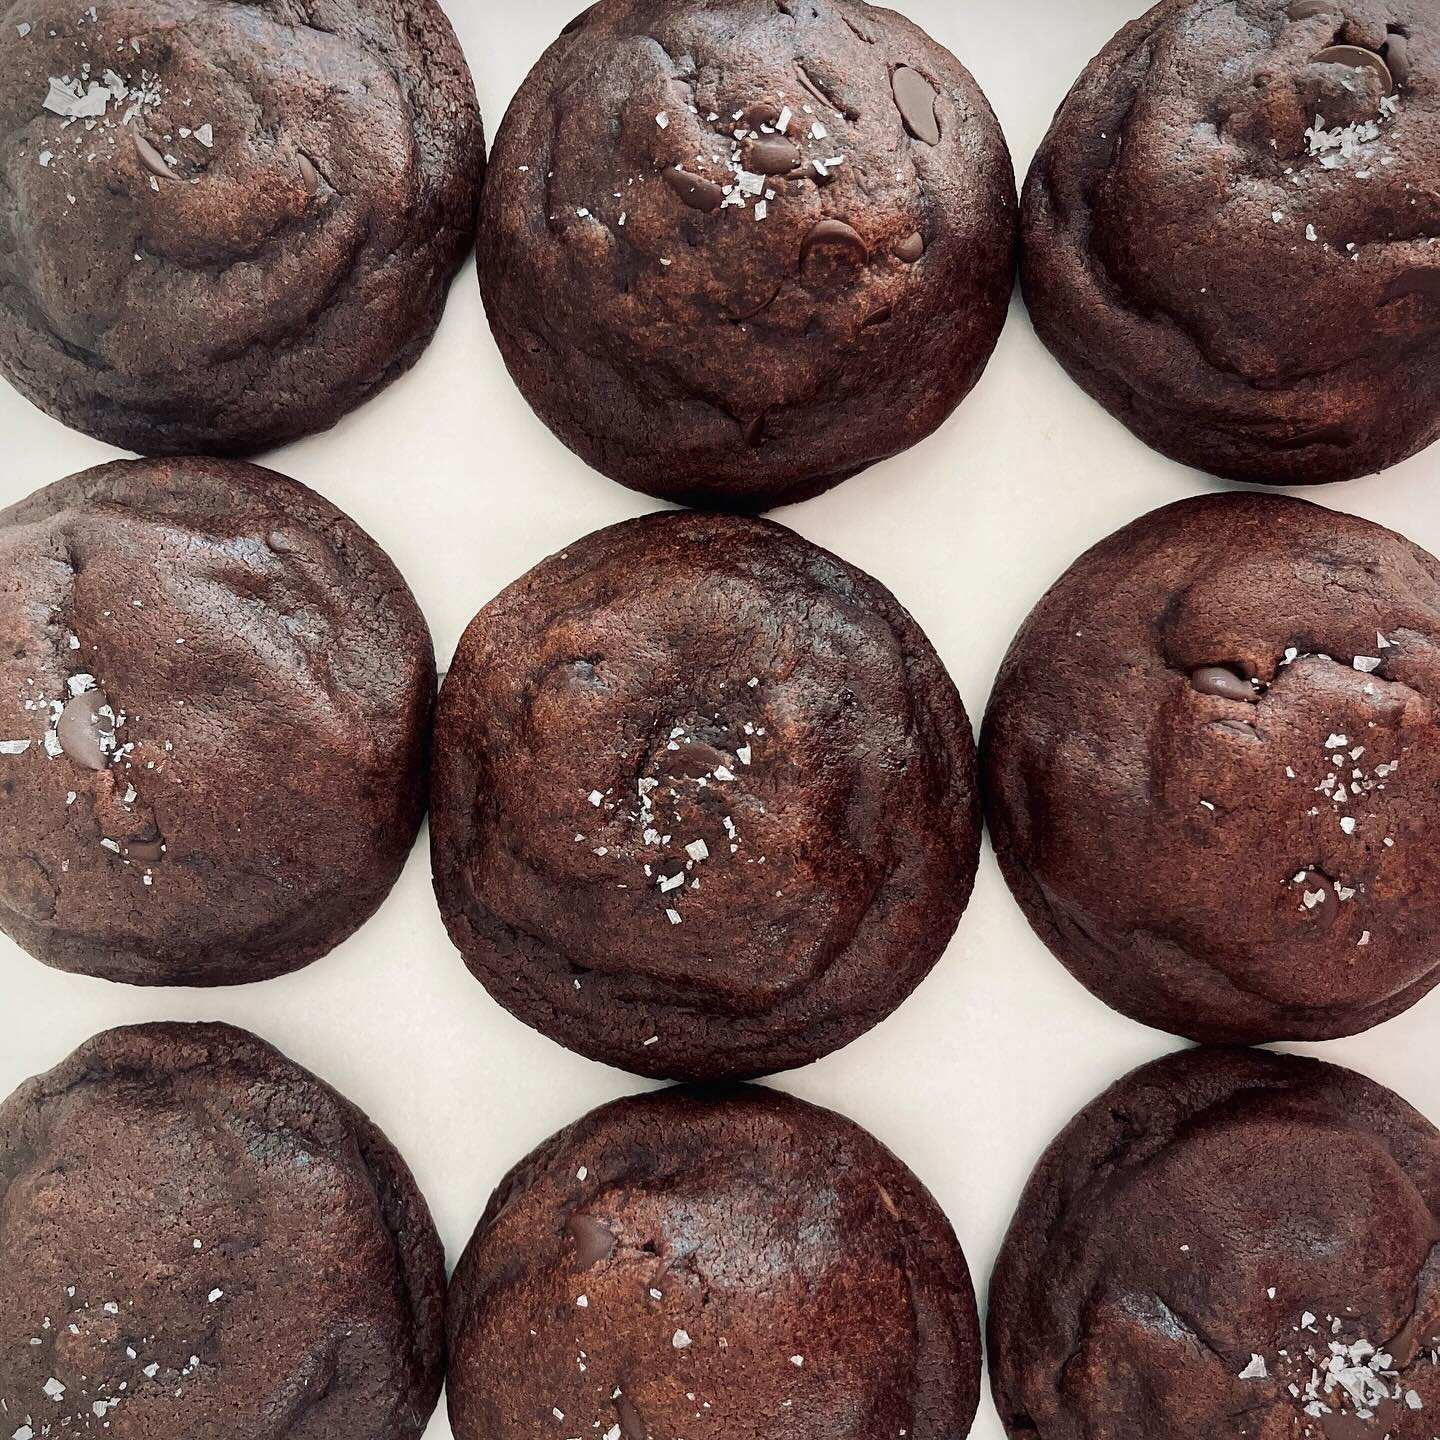 Triple Chocolate Espresso cookies are the perfect weekend treat. All those in agreement ❤️ this post!